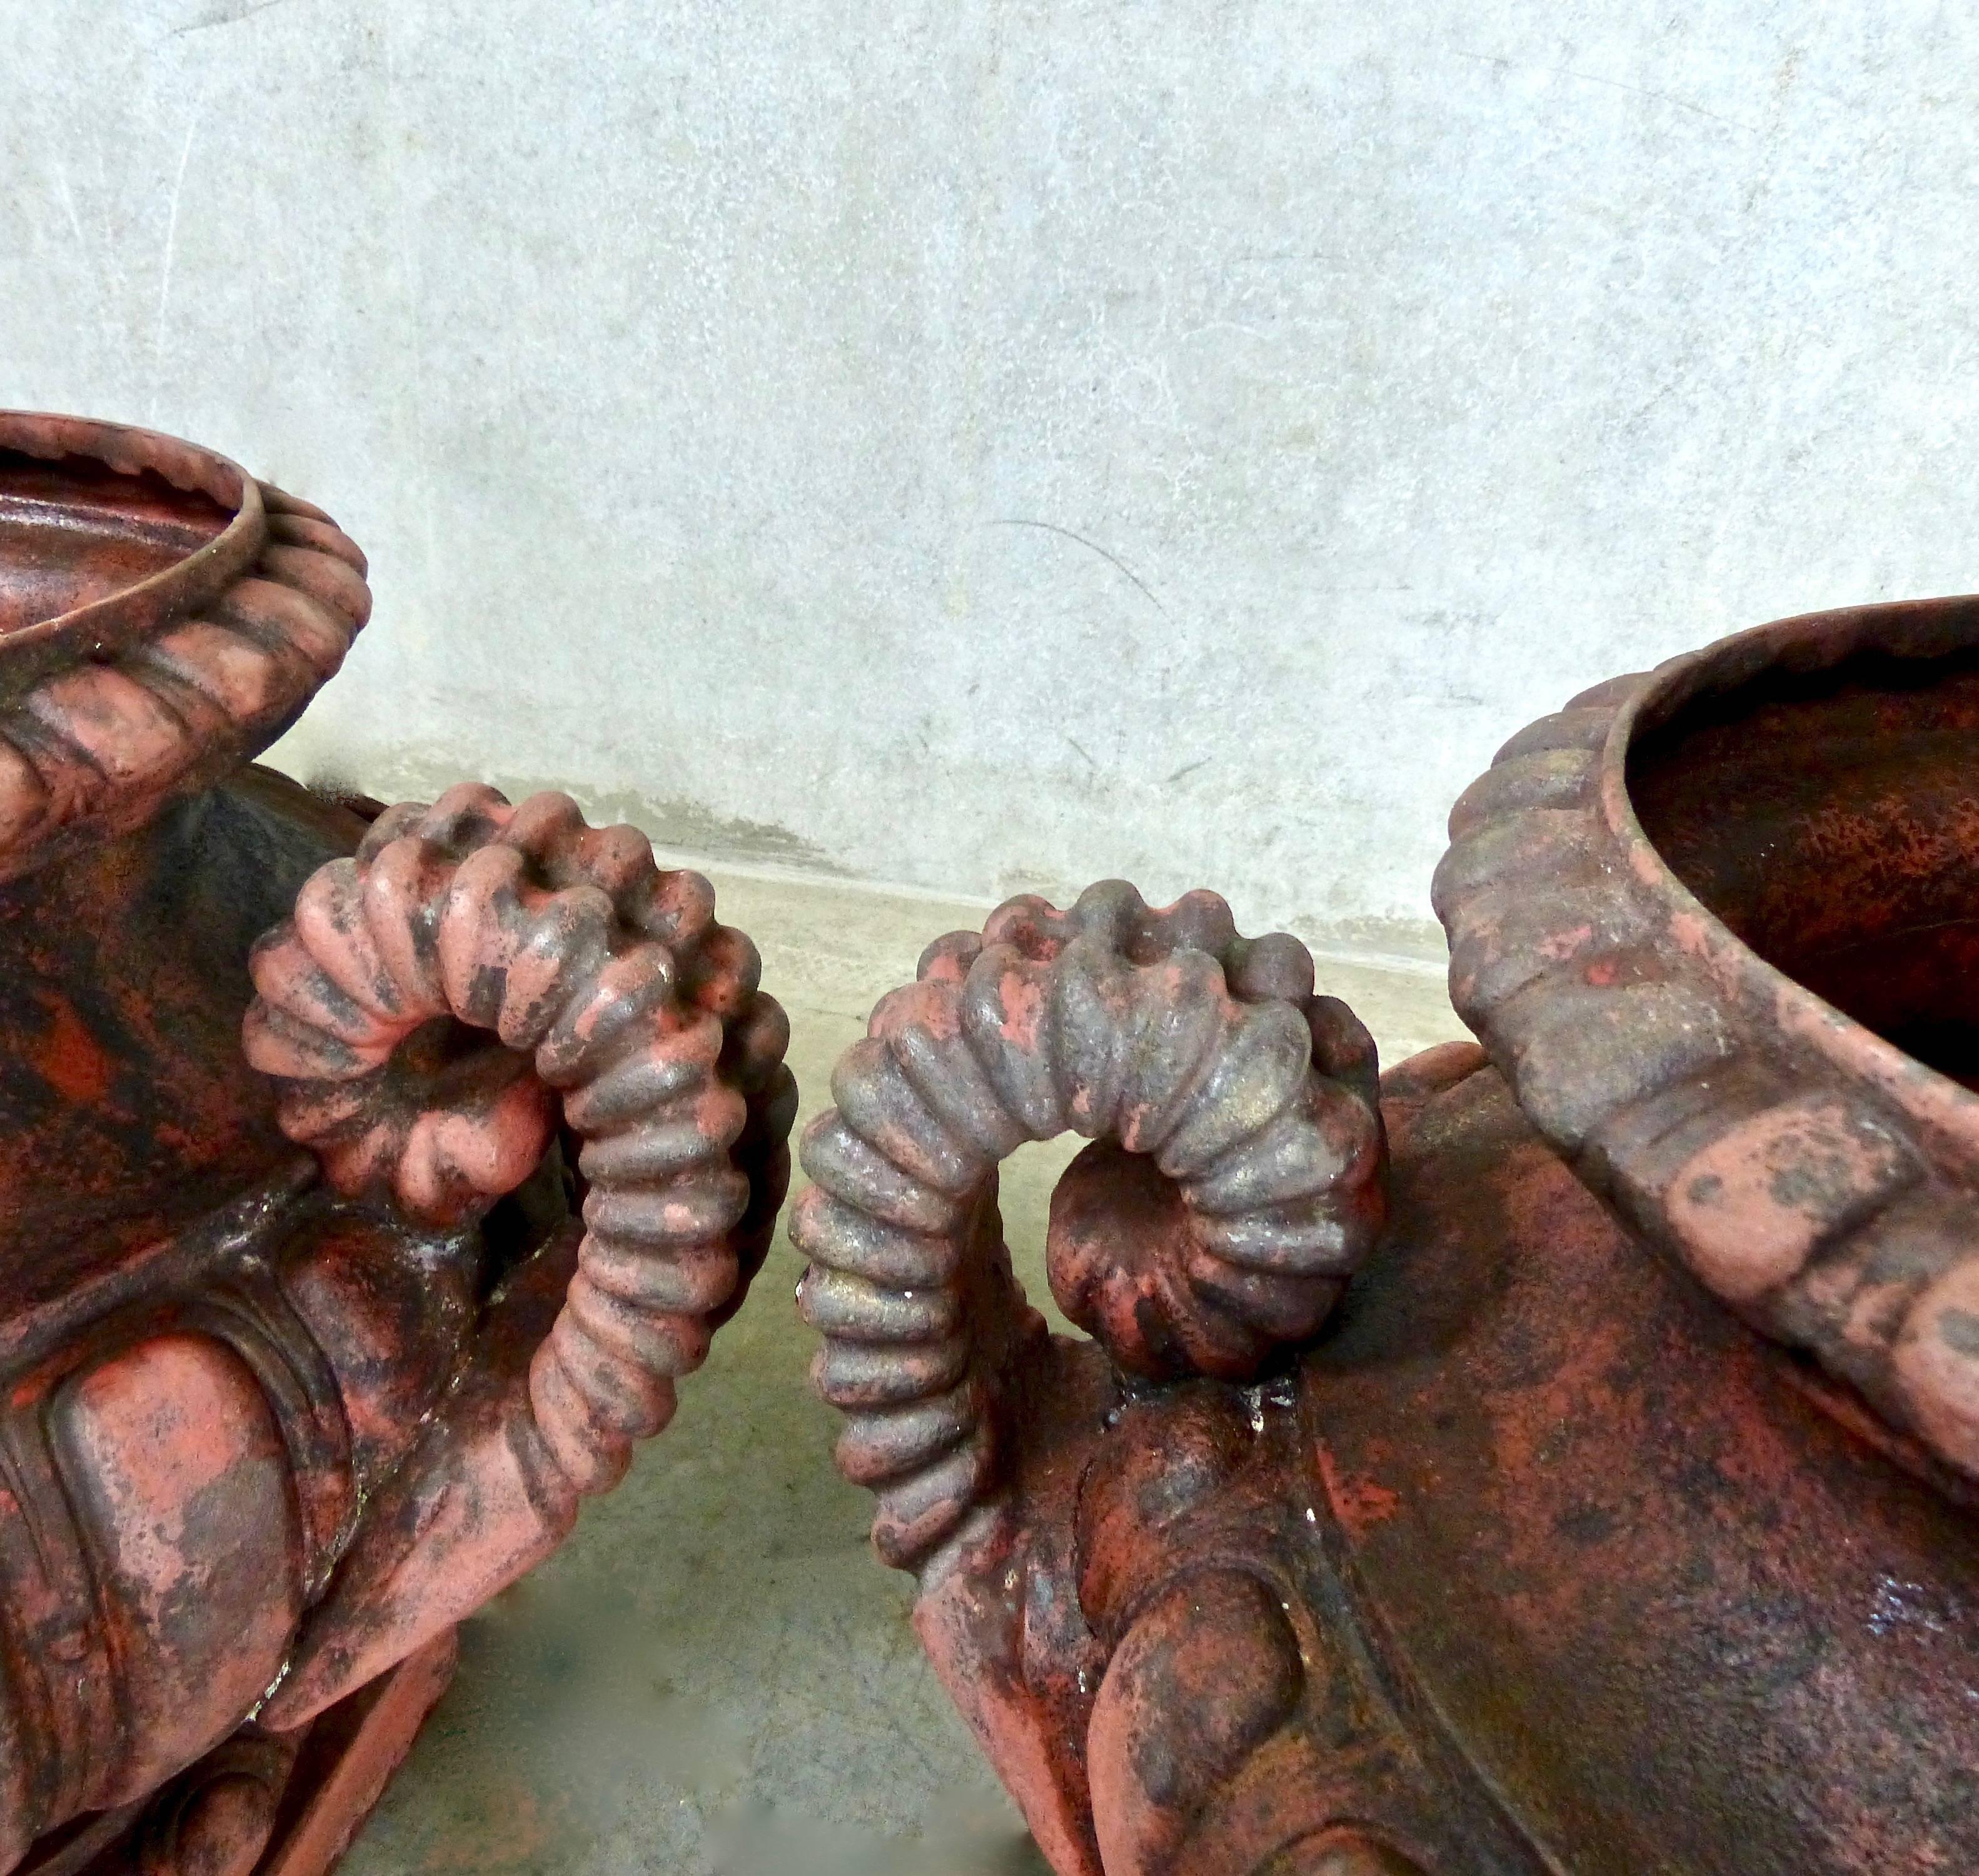 A substantial pair of French, cast iron planters with unique ribbed handles. Their red color and forceful design will create a focal point in any garden or patio.
Found in an estate in NYC in the 1970s. These are substantial size, no cracks and